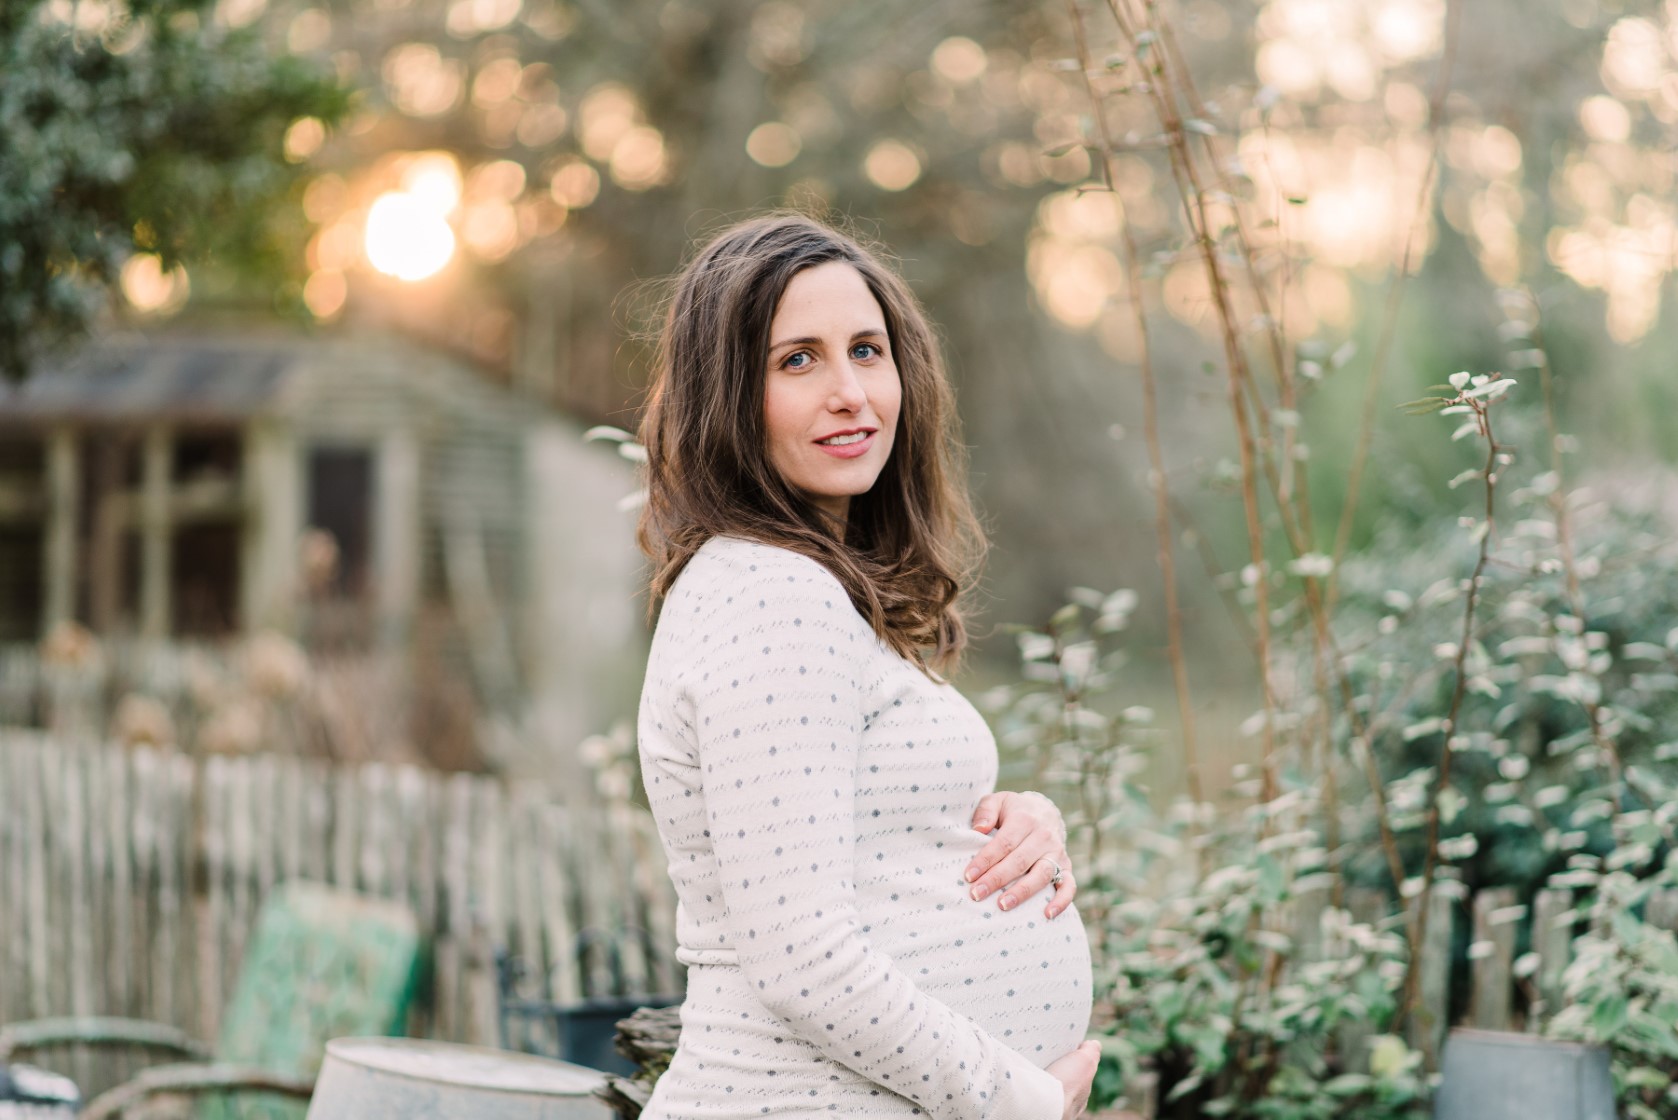 TTC with PCOS: How I Prepared for Conception